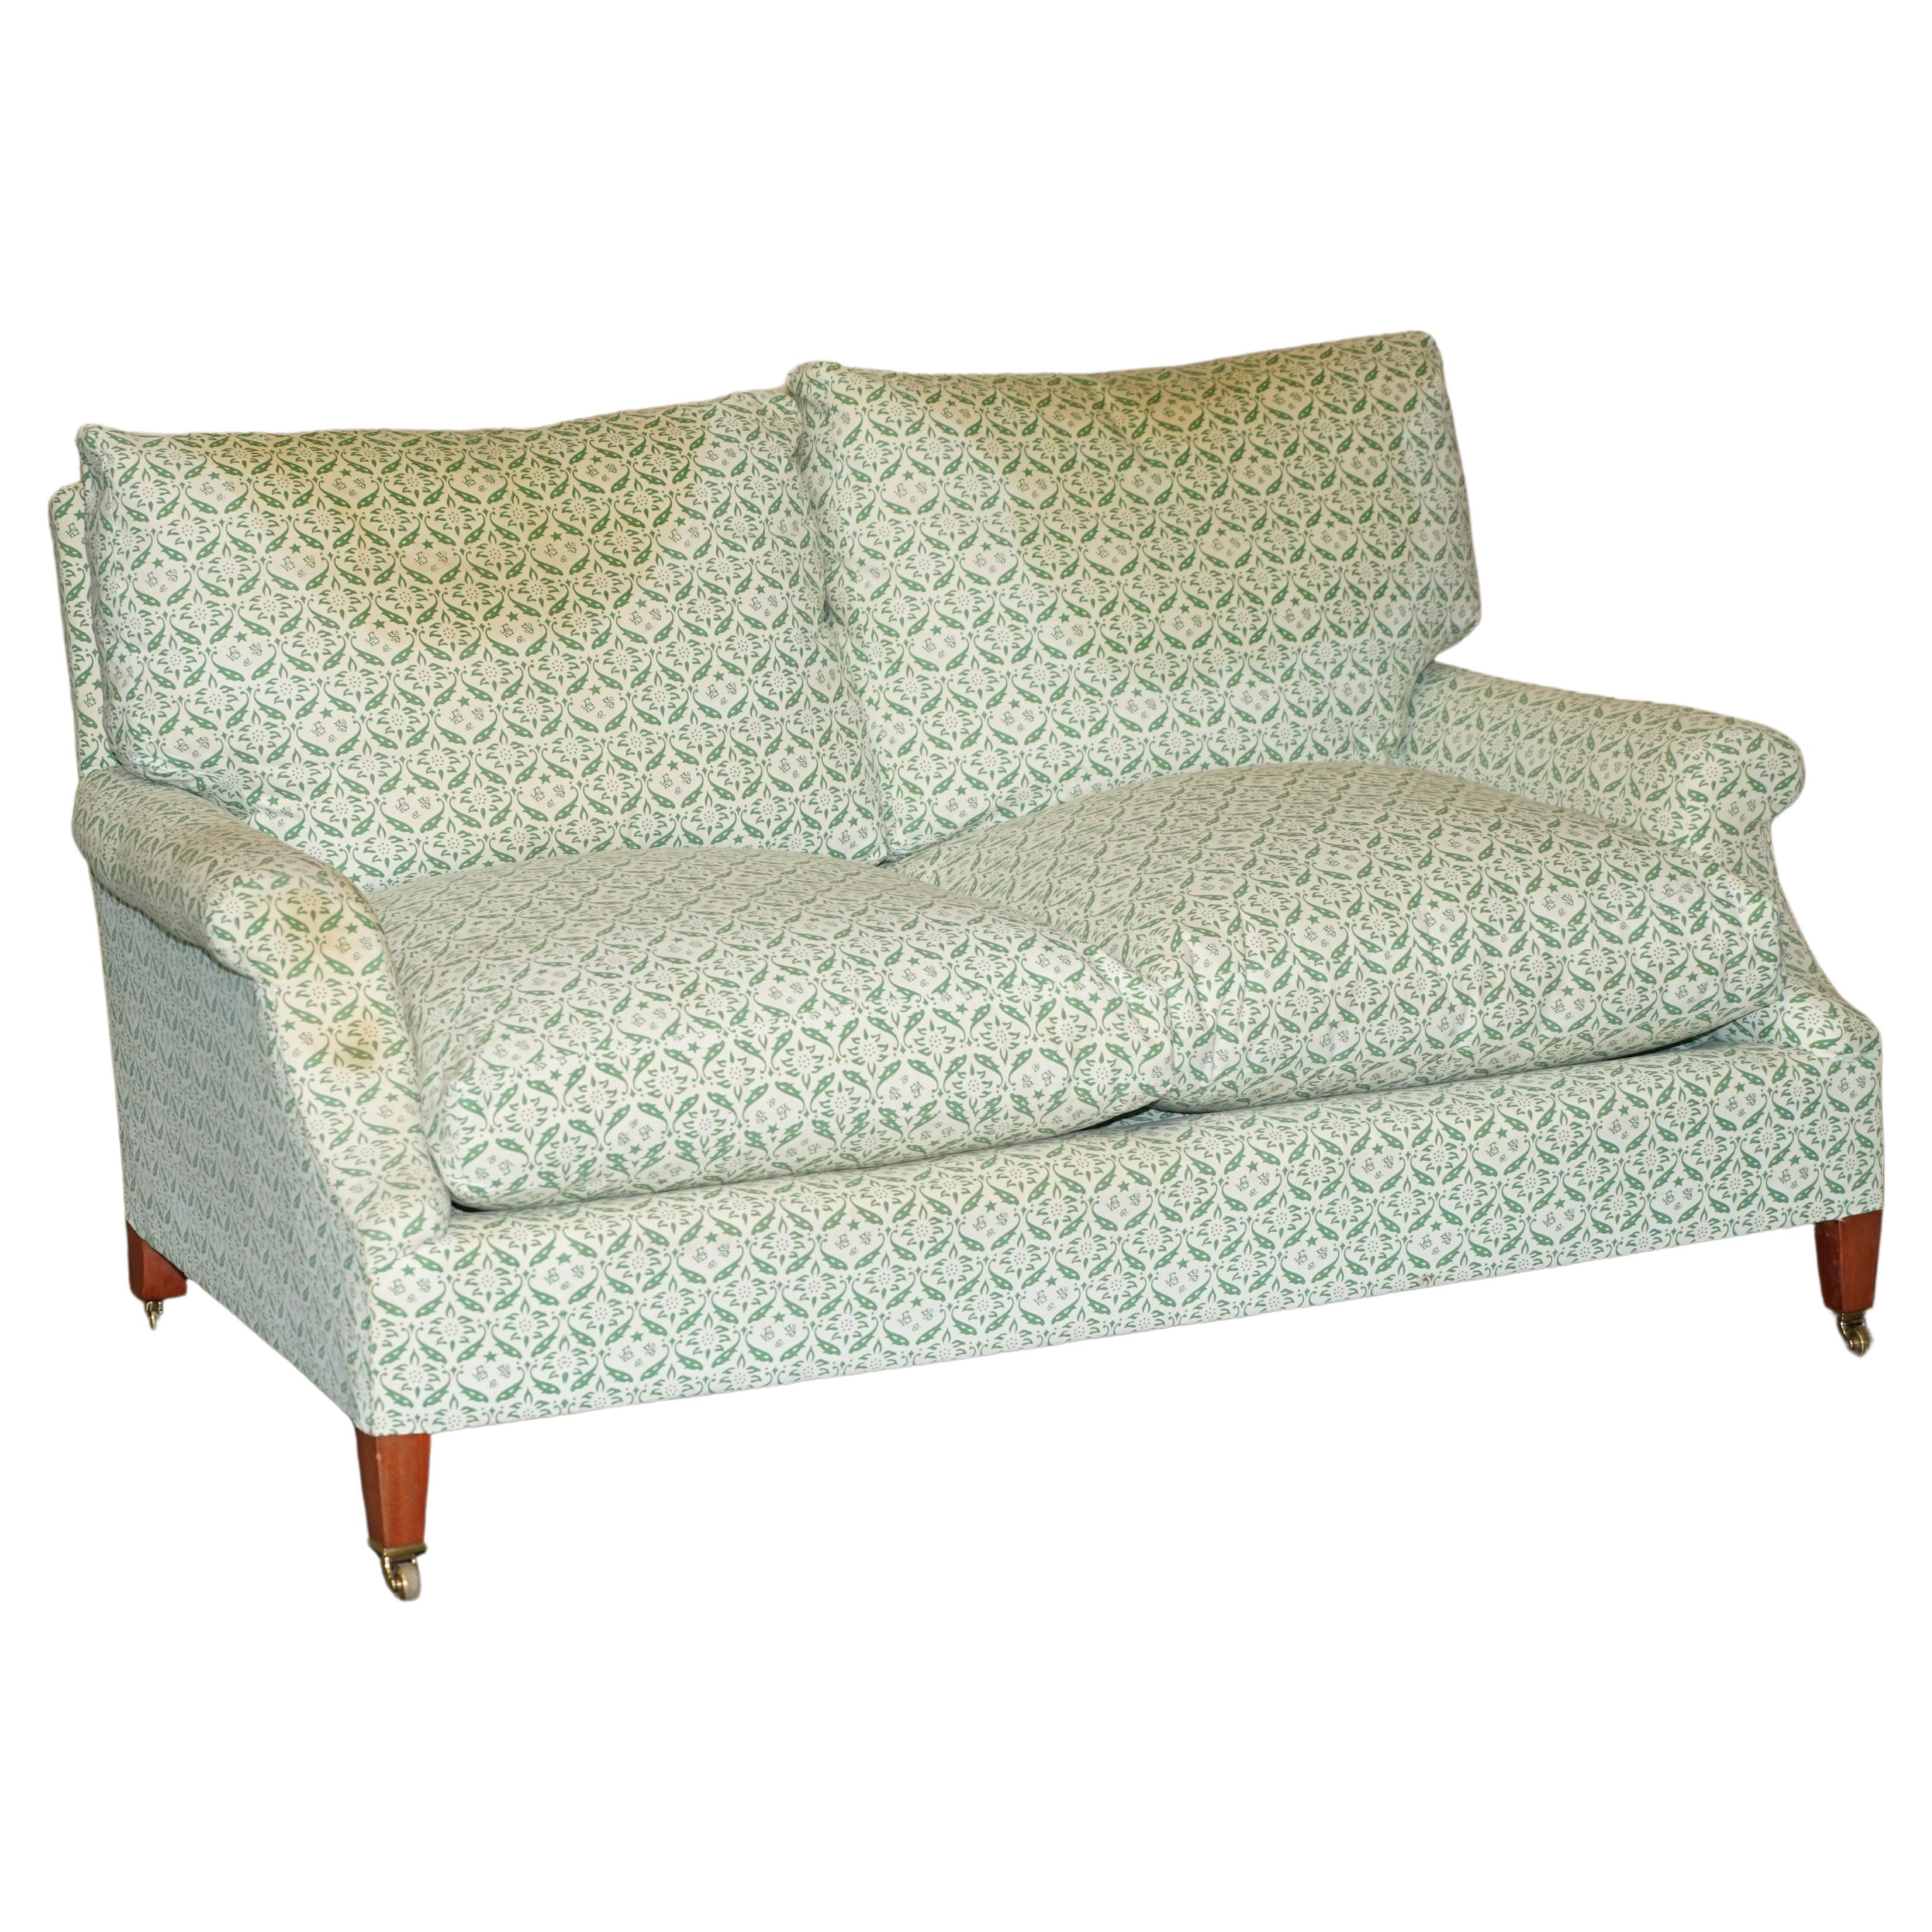 Comfortable Howard & Son's Chairs Ltd Ticking Fabric Sofa Feather Fill Cushions For Sale